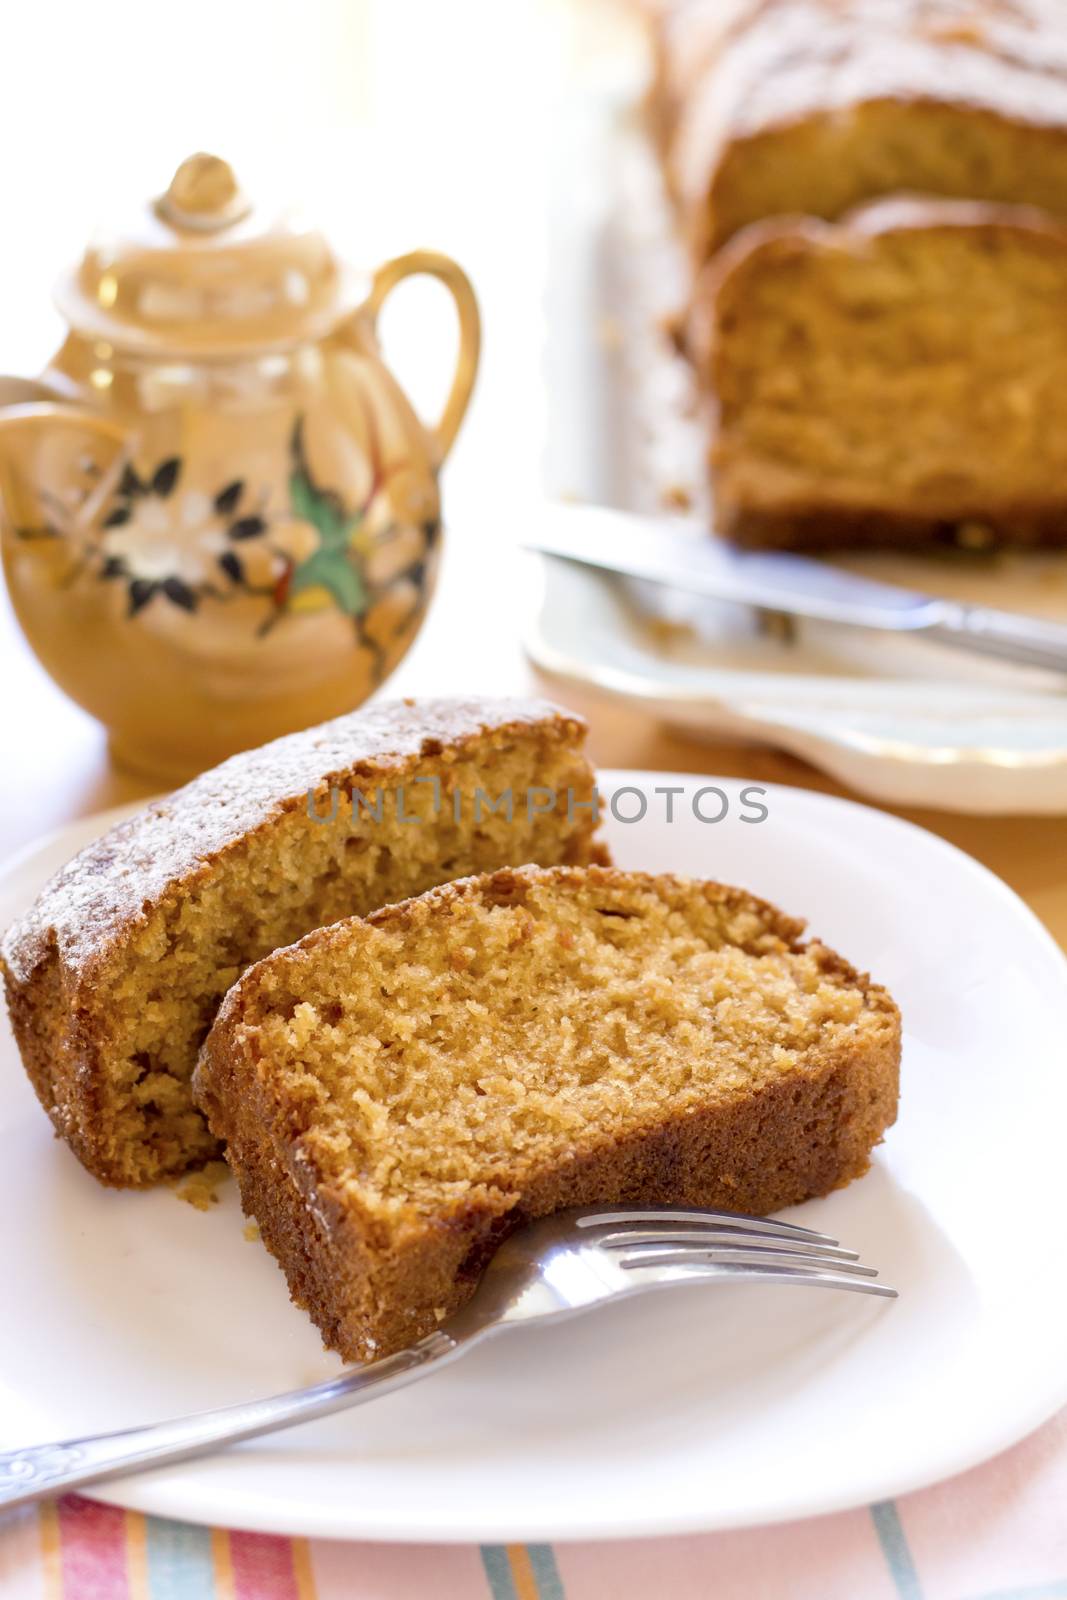 sweet almond homemade cake on white plate with coffee by sigoisette